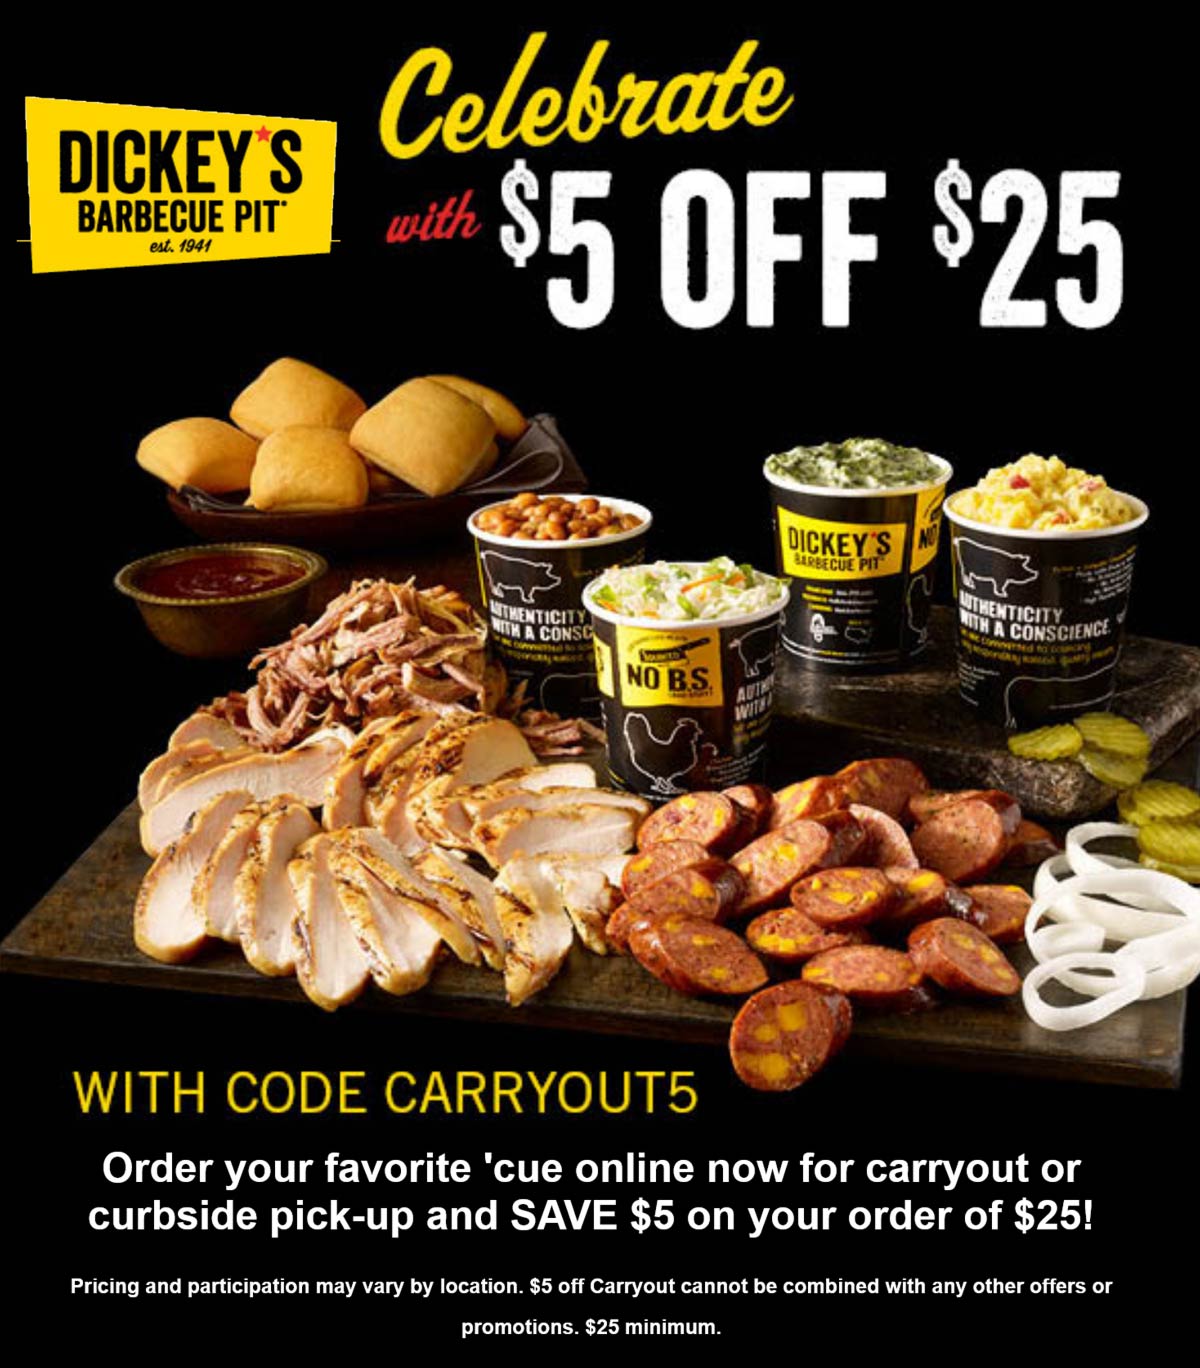 5 off 25 at Dickeys Barbecue Pit restaurants via promo code CARRYOUT5